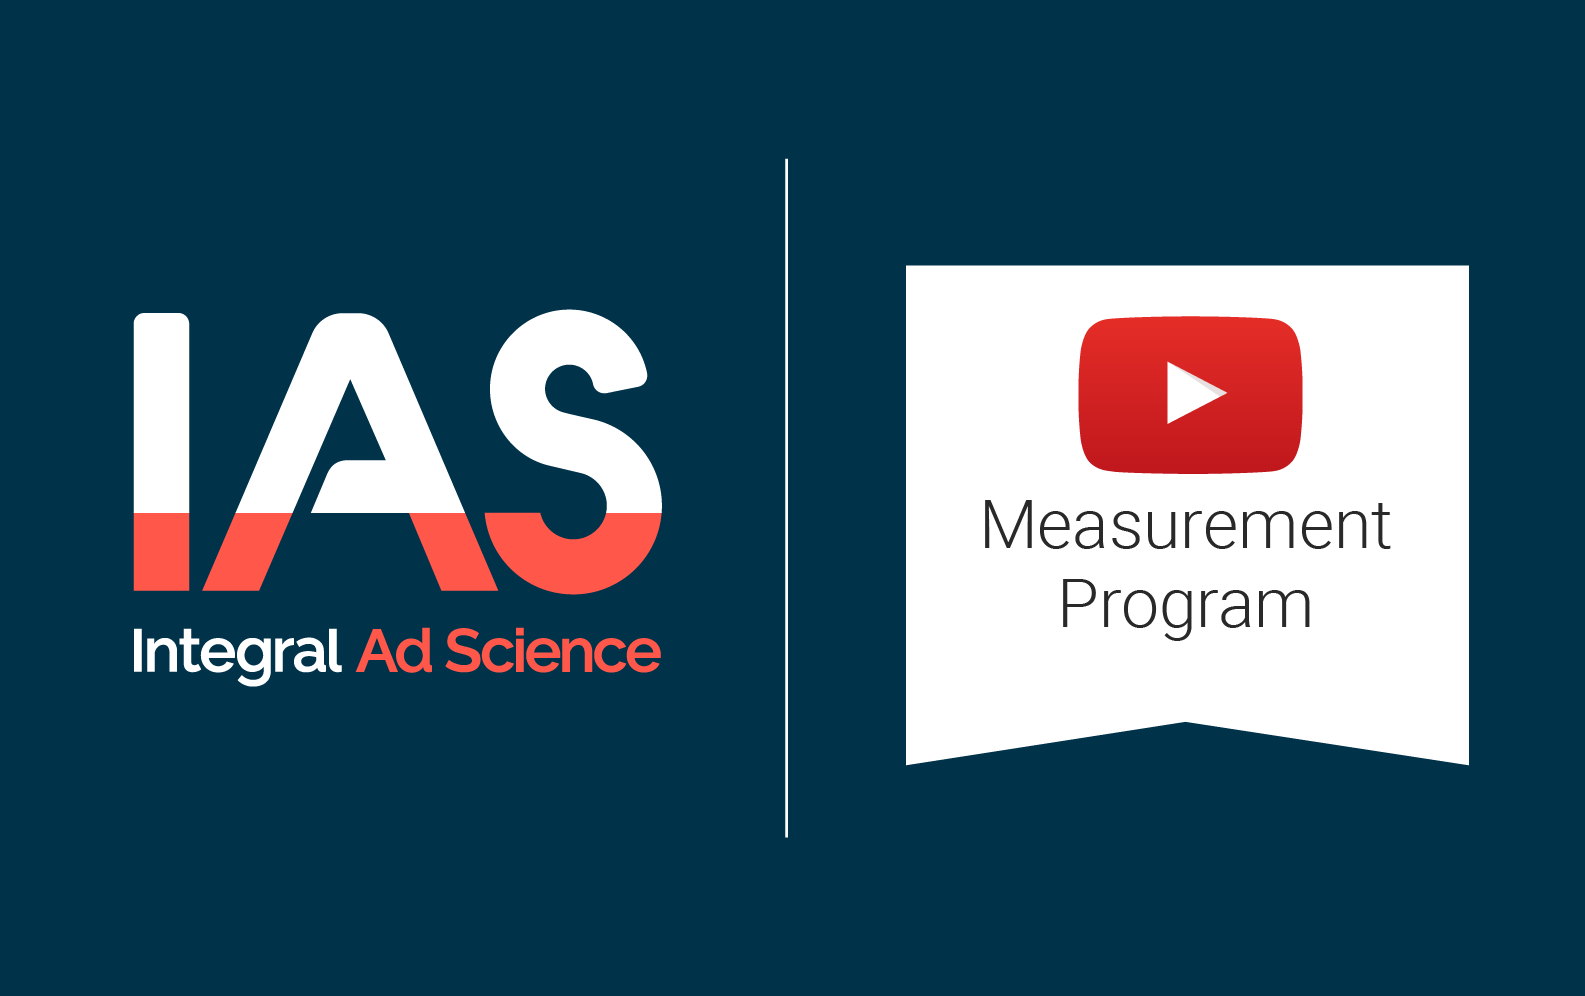 IAS selected for the YouTube Measurement Program